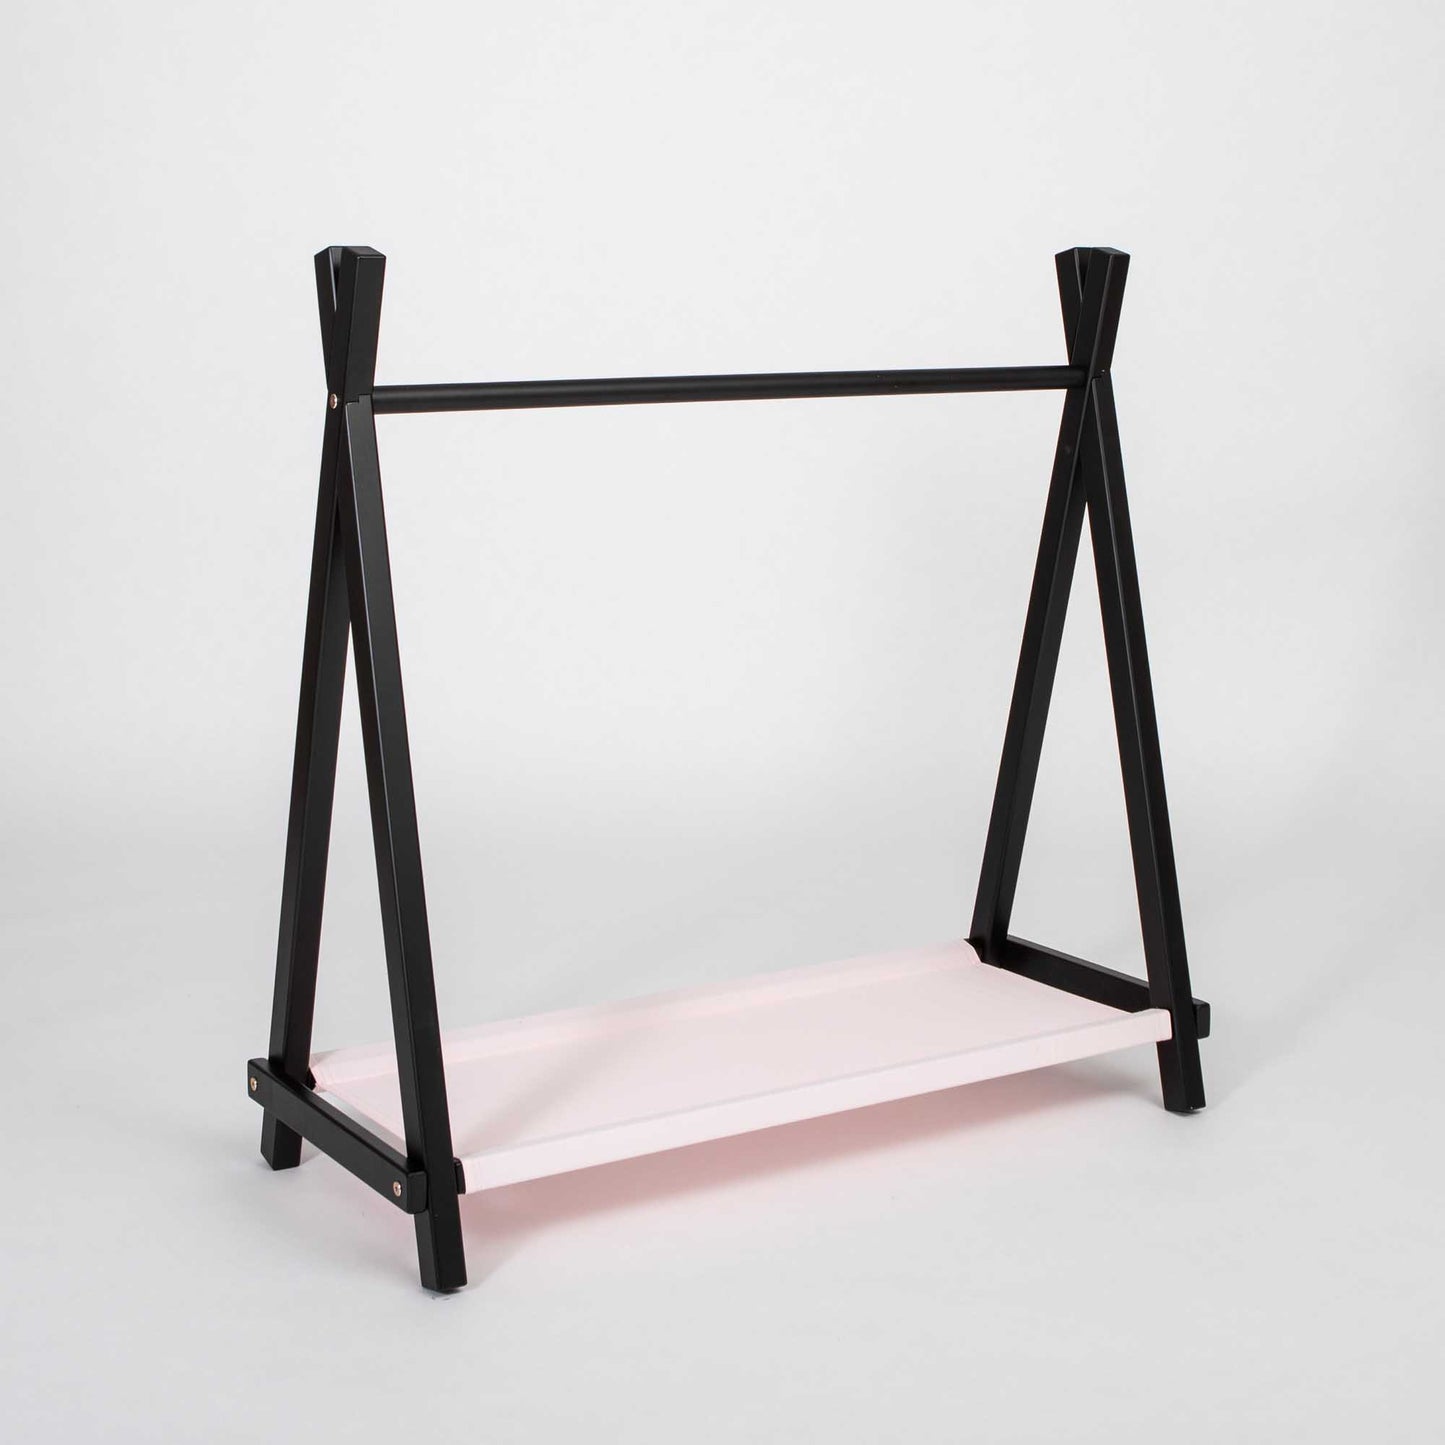 A Kids' clothing rack with storage in a chic black and pink color scheme, displayed against a clean white background.